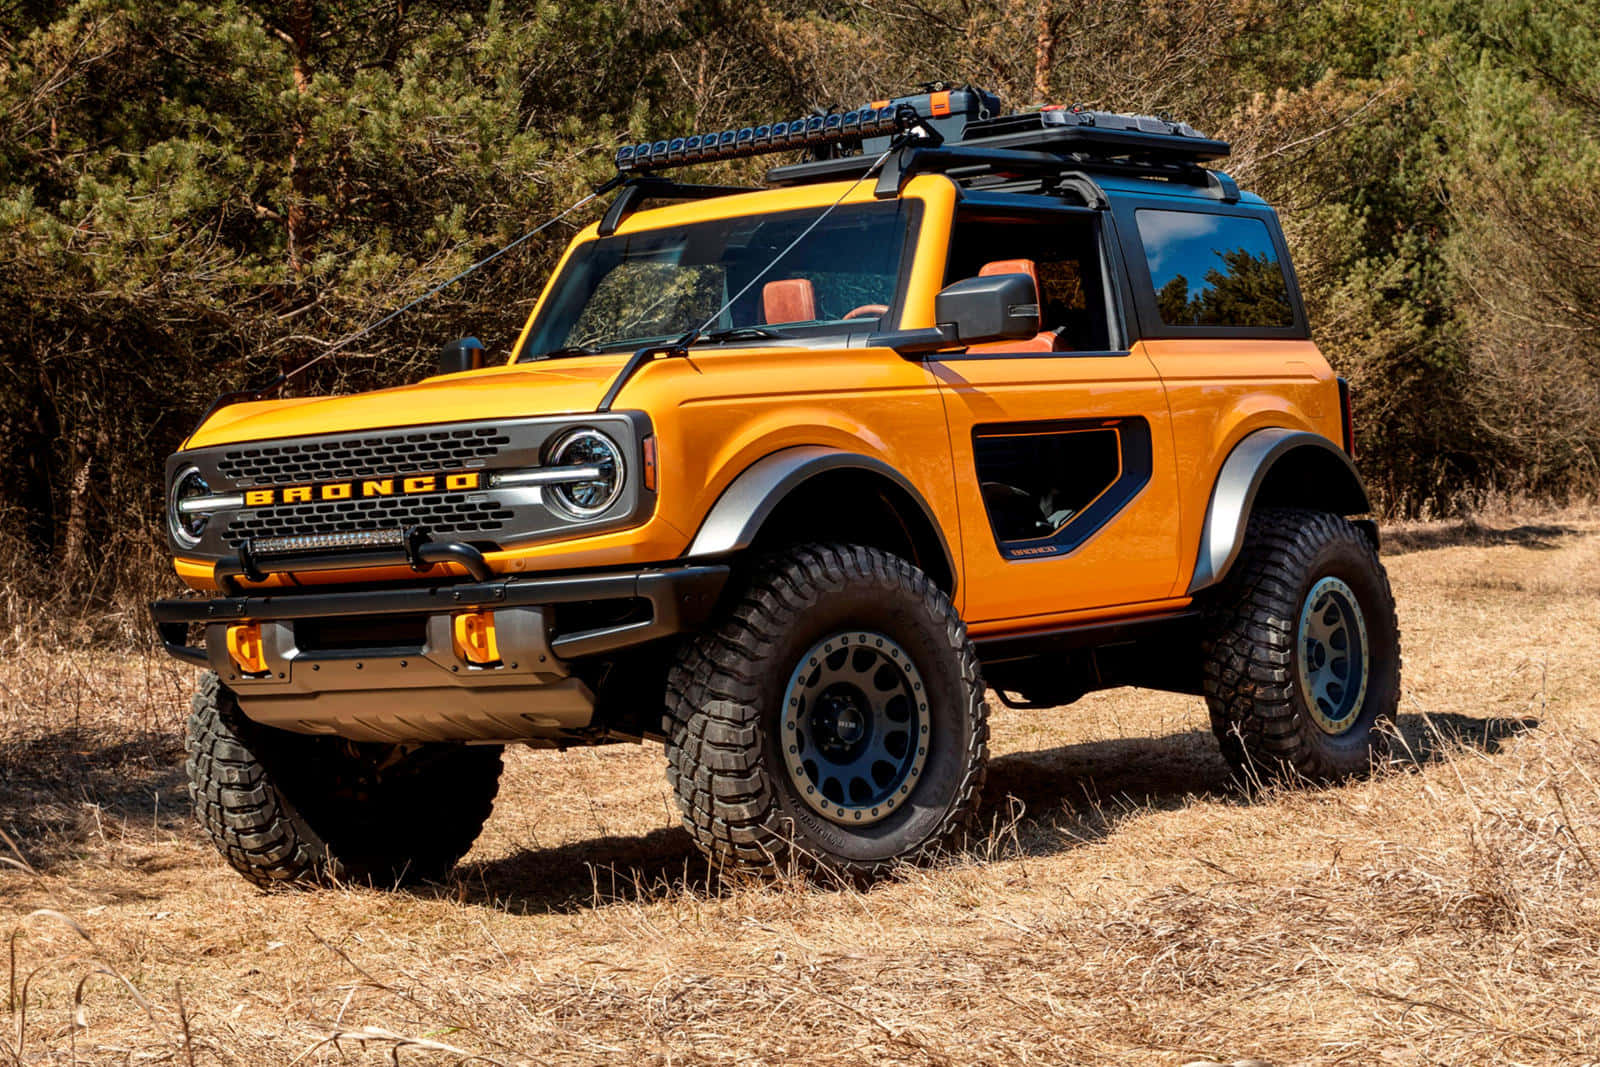 "Take On Any Adventure with the Classic Ford Bronco"